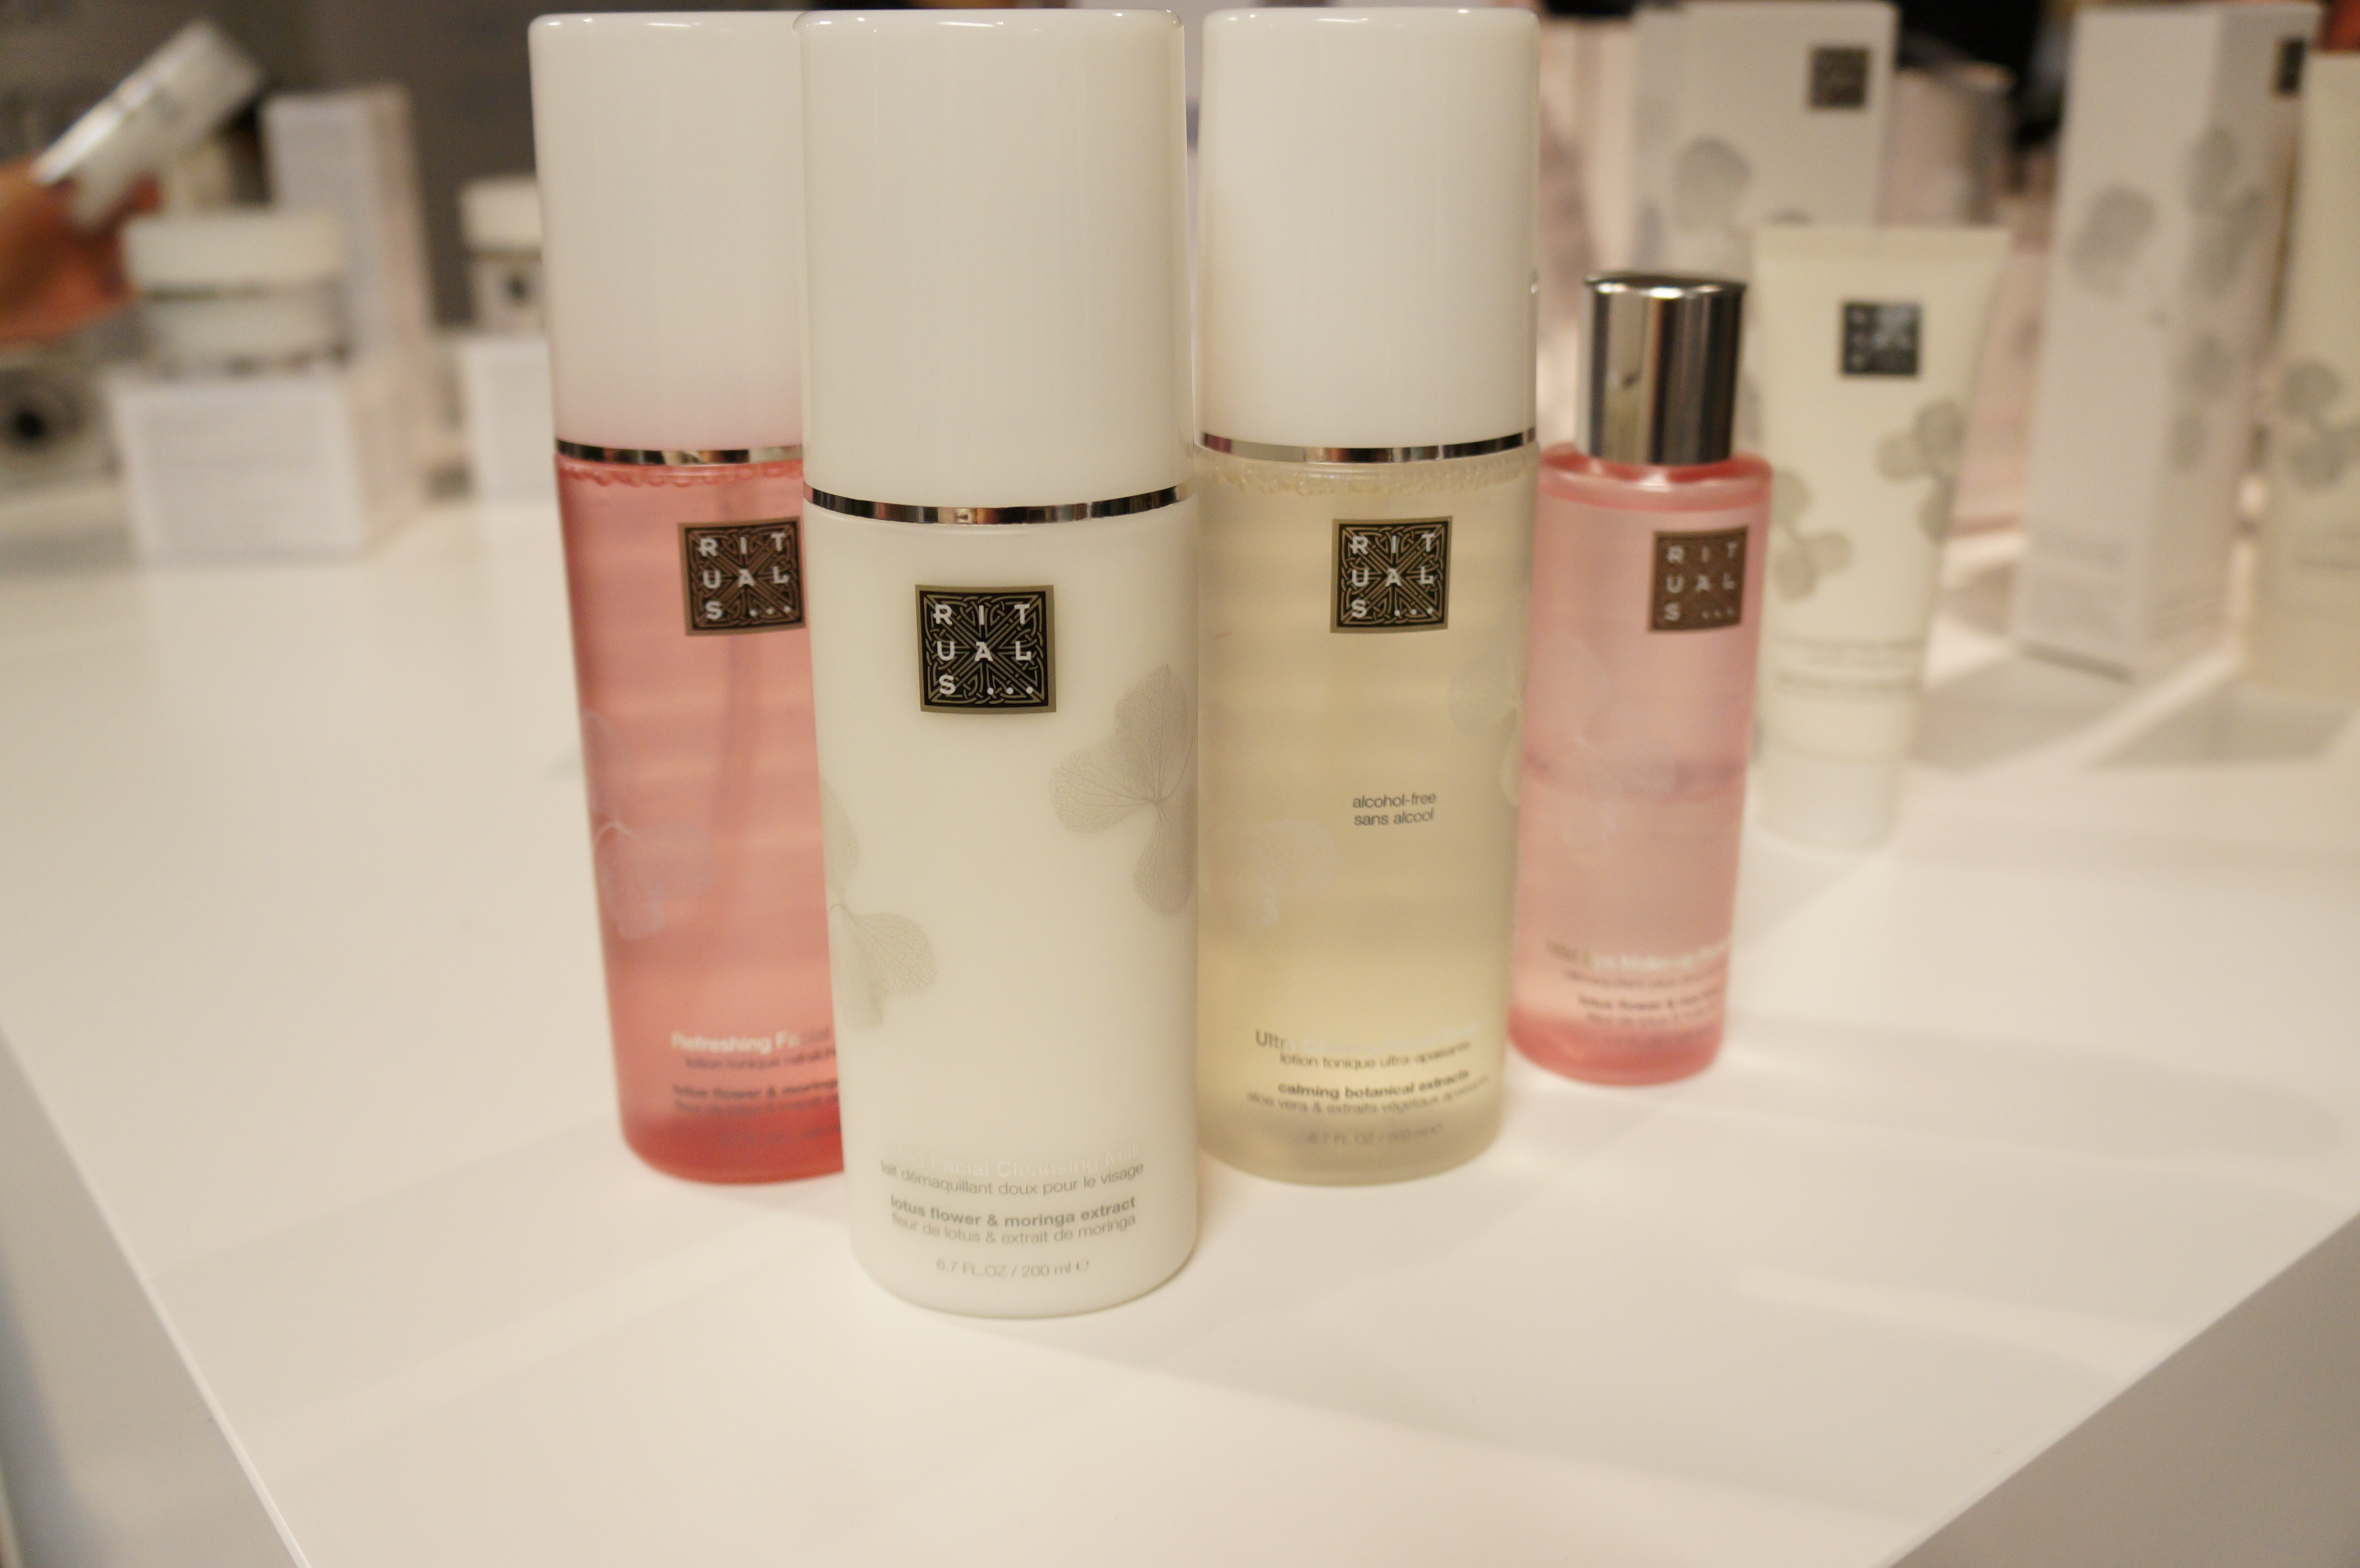 Ritals cleansers/ Pic by kiwikoo